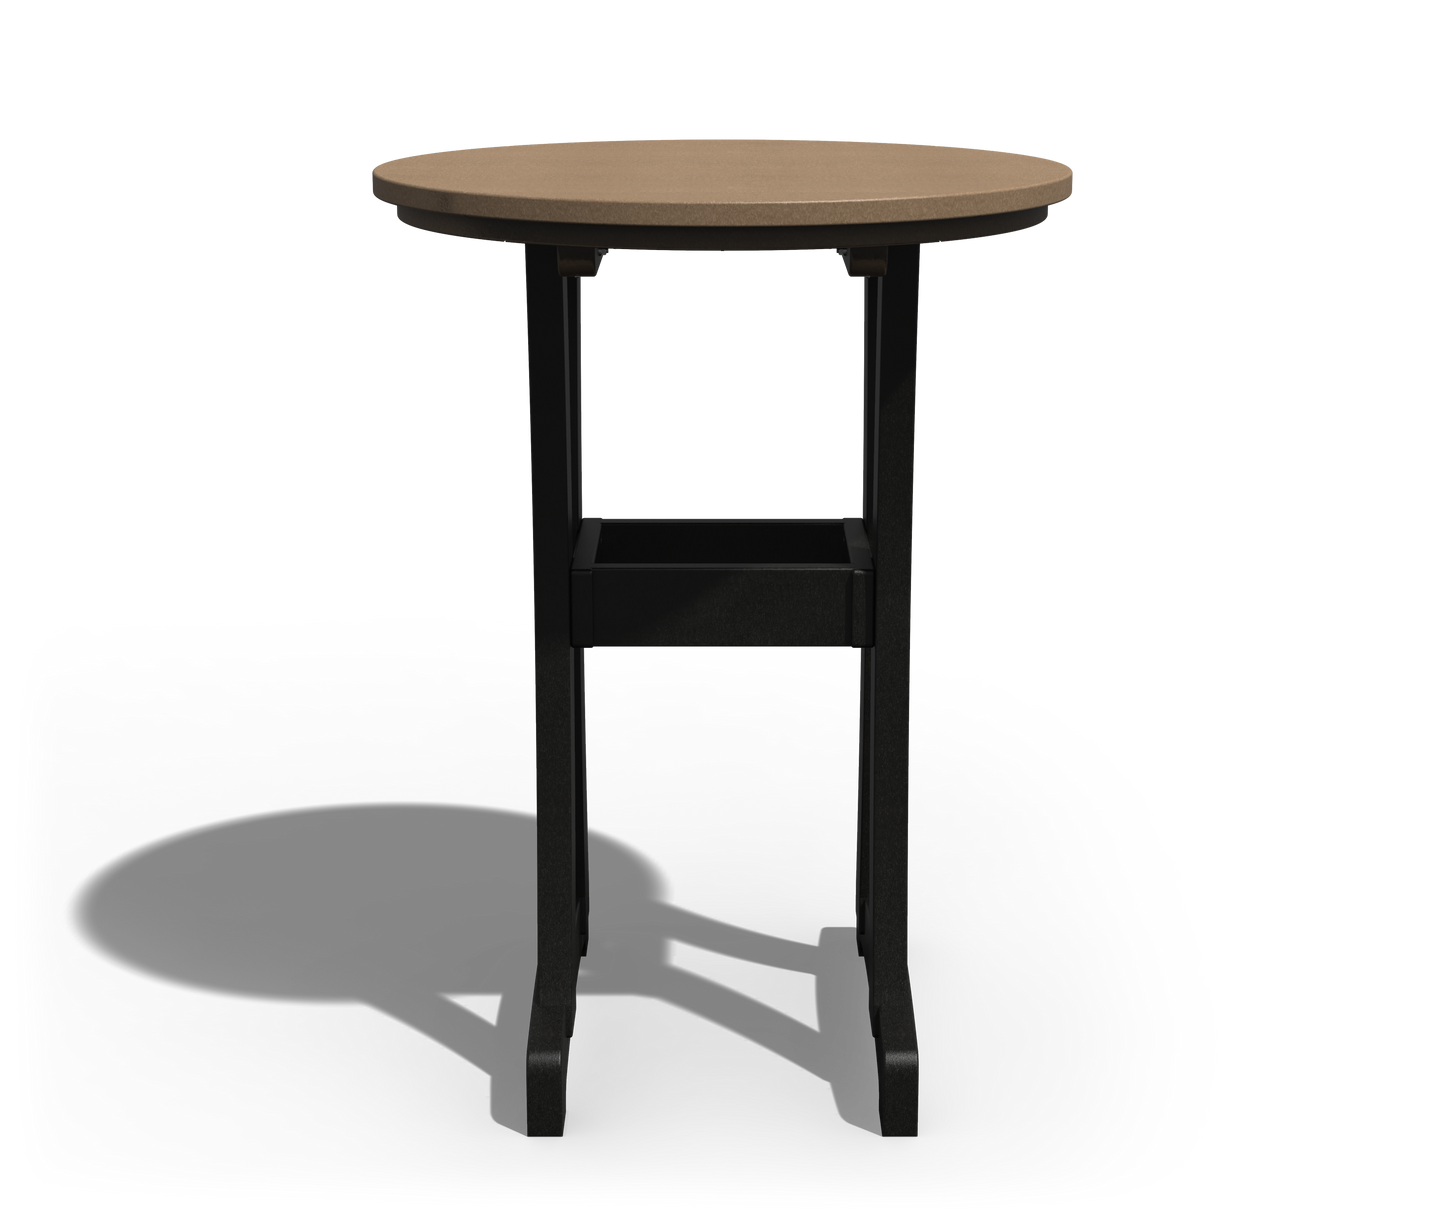 Patiova Recycled Plastic 30" Round Legacy Bar Table - LEAD TIME TO SHIP 3 WEEKS